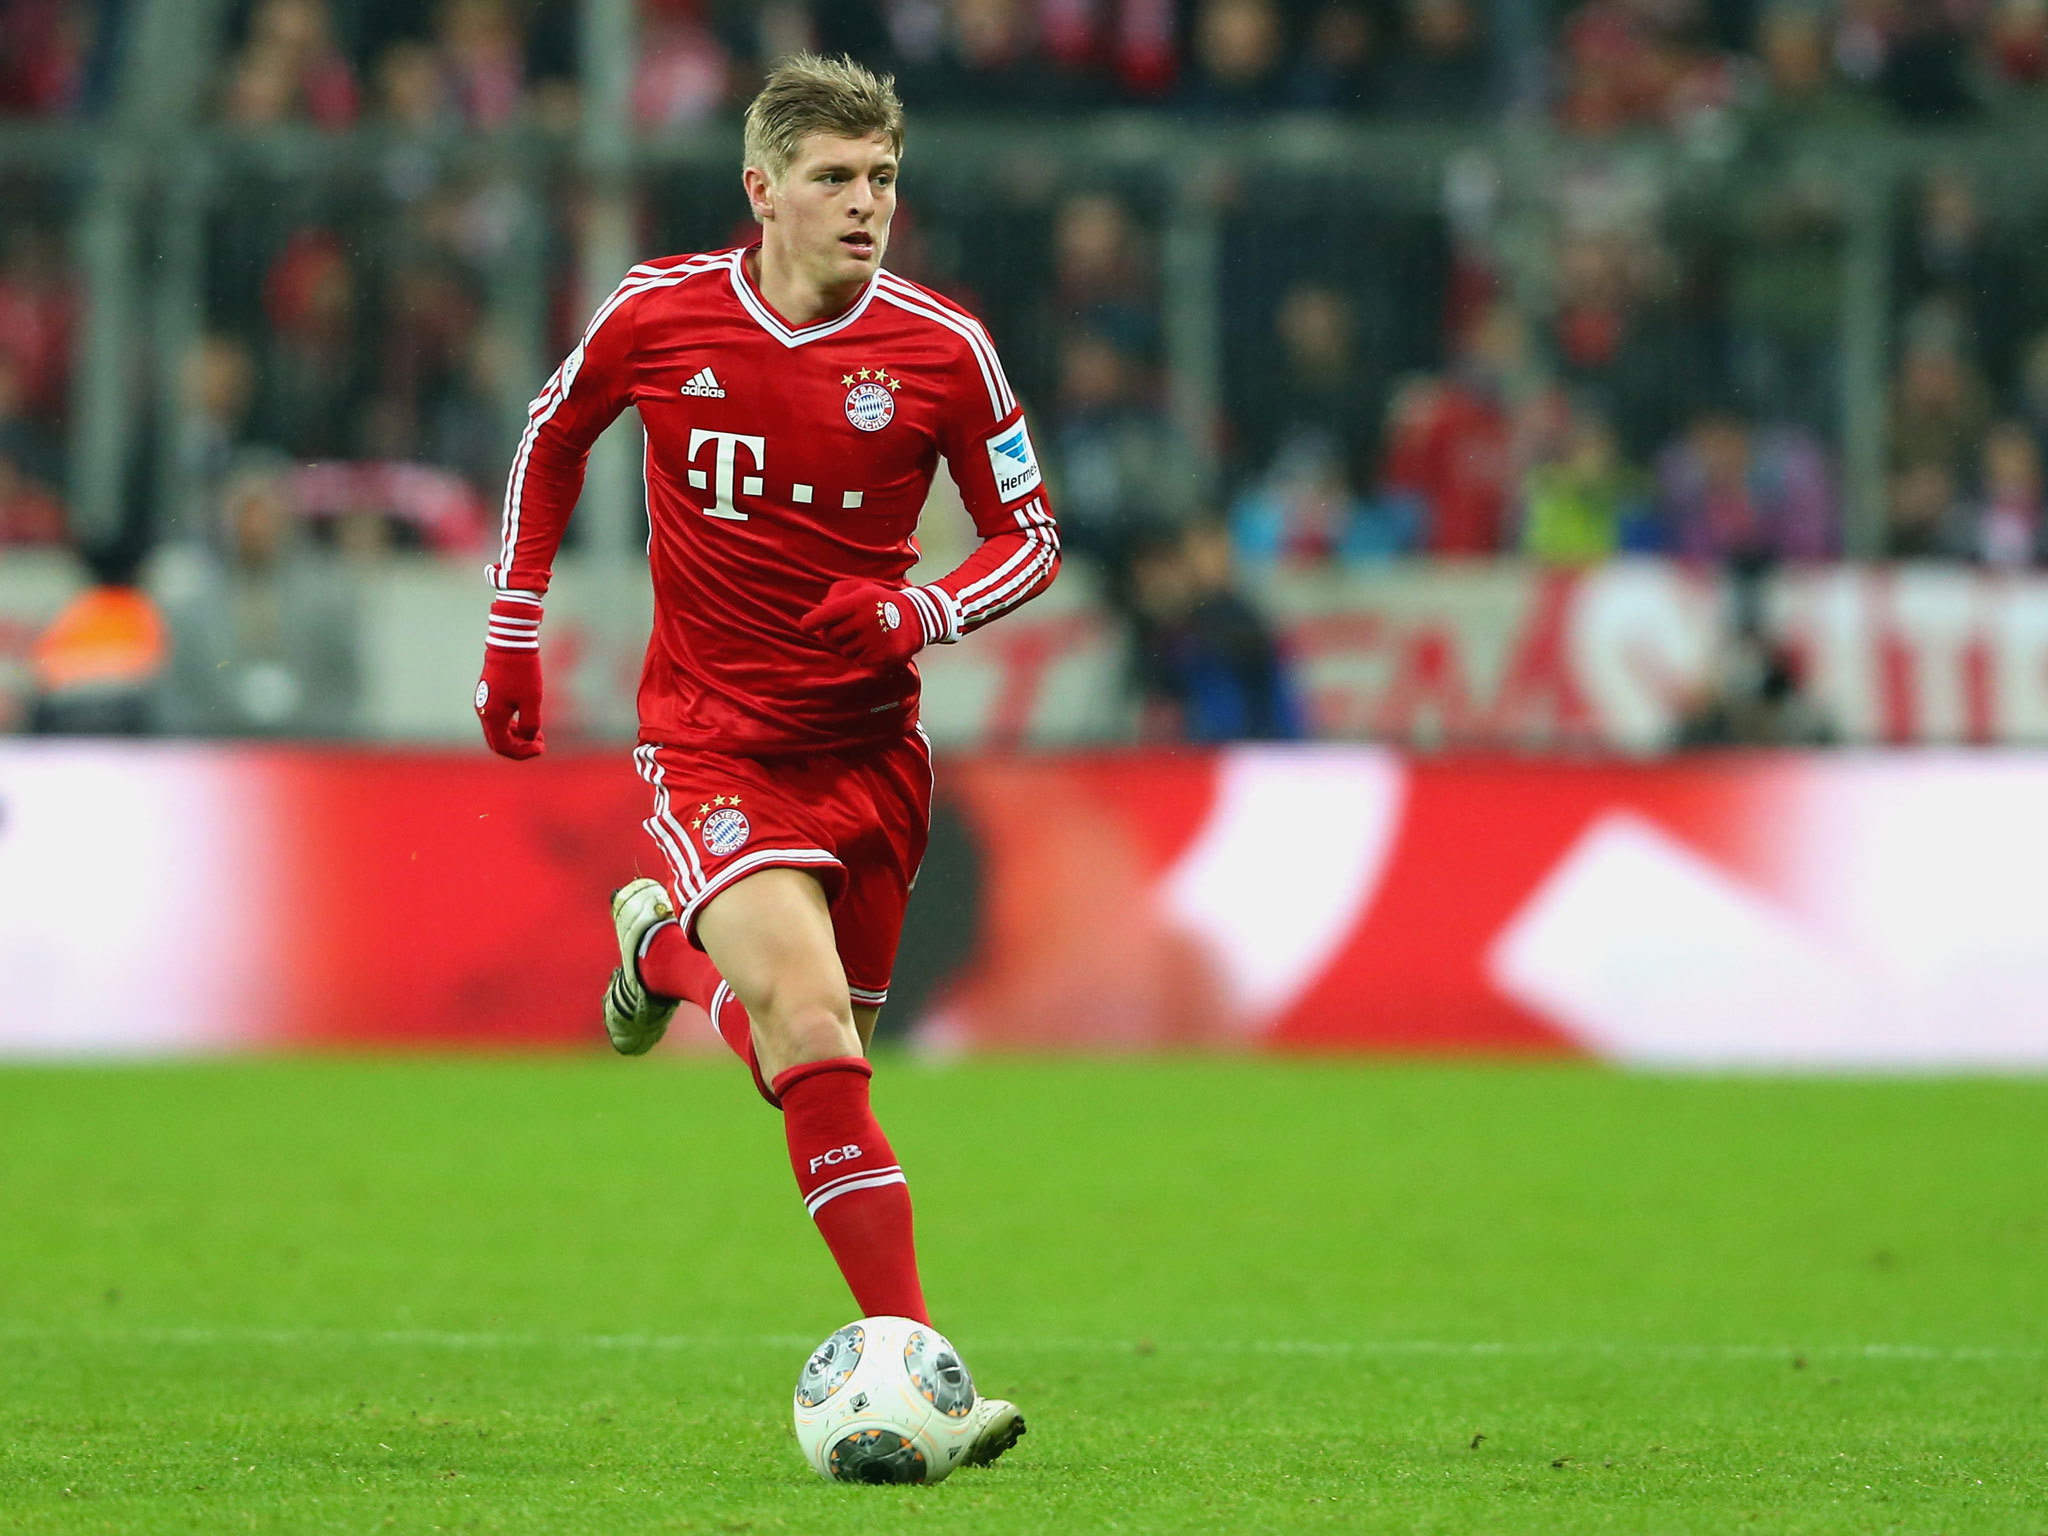 Download Toni Kroos Football Soccer Player Free Mobile Defence Ball Hd Background Desktop Wallpaper Photos